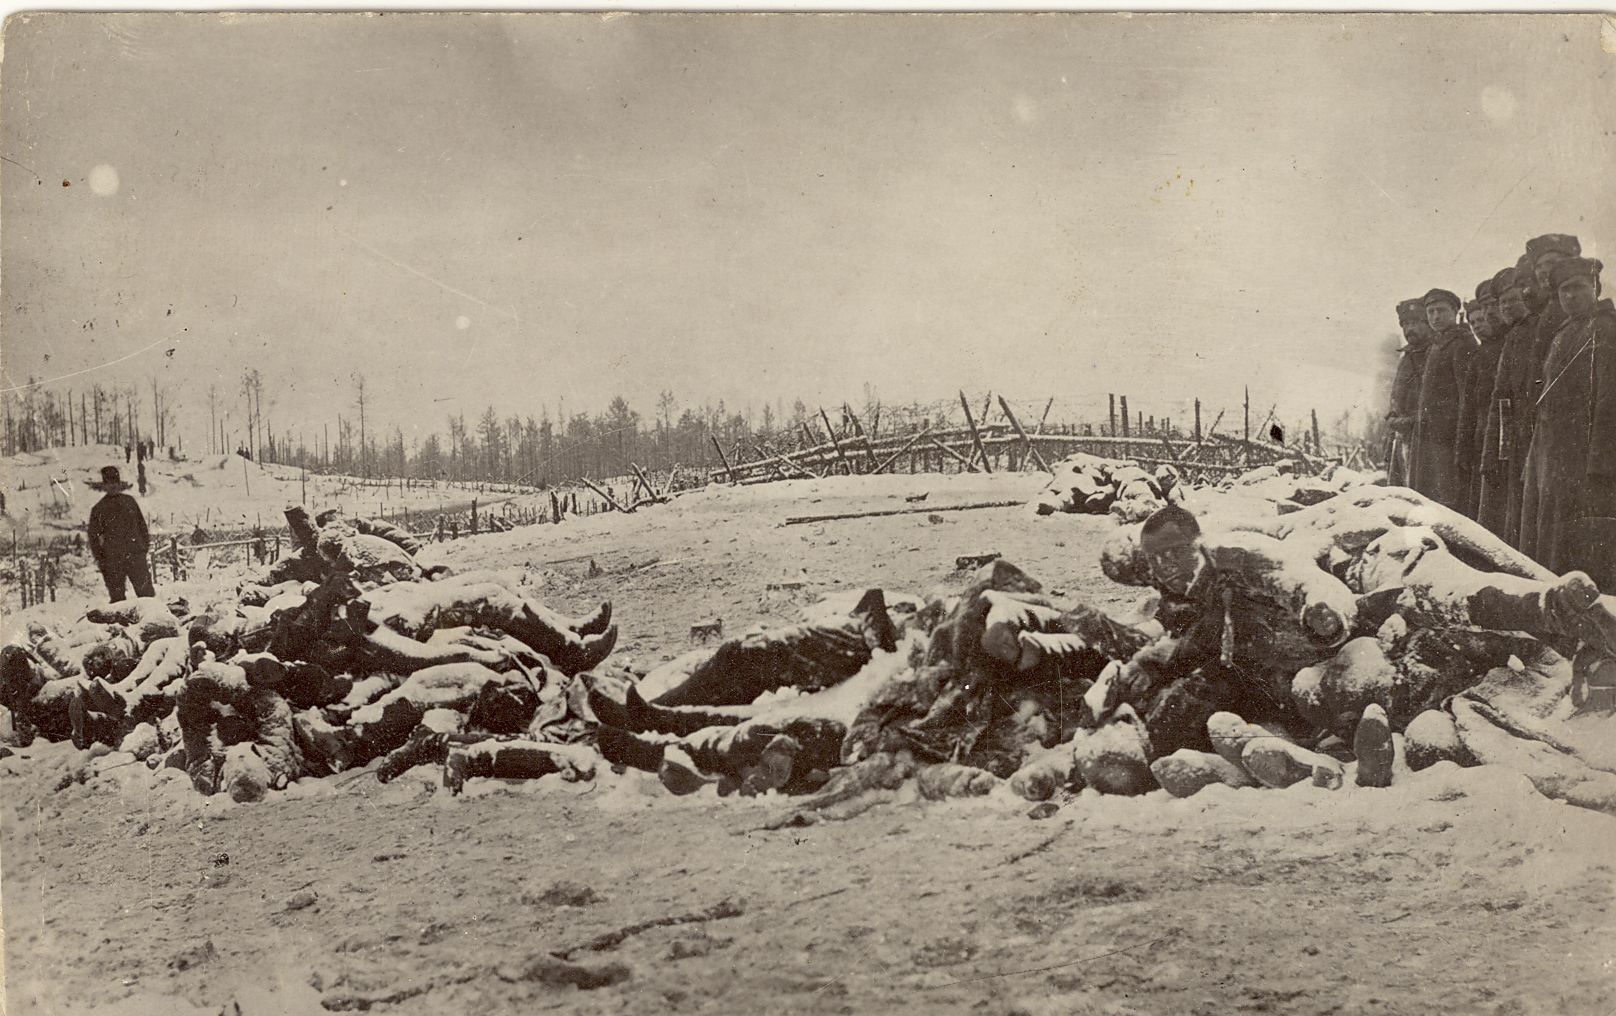 Latvian hunters fell on the Mountain of Mountains on the Riga Front in World War I